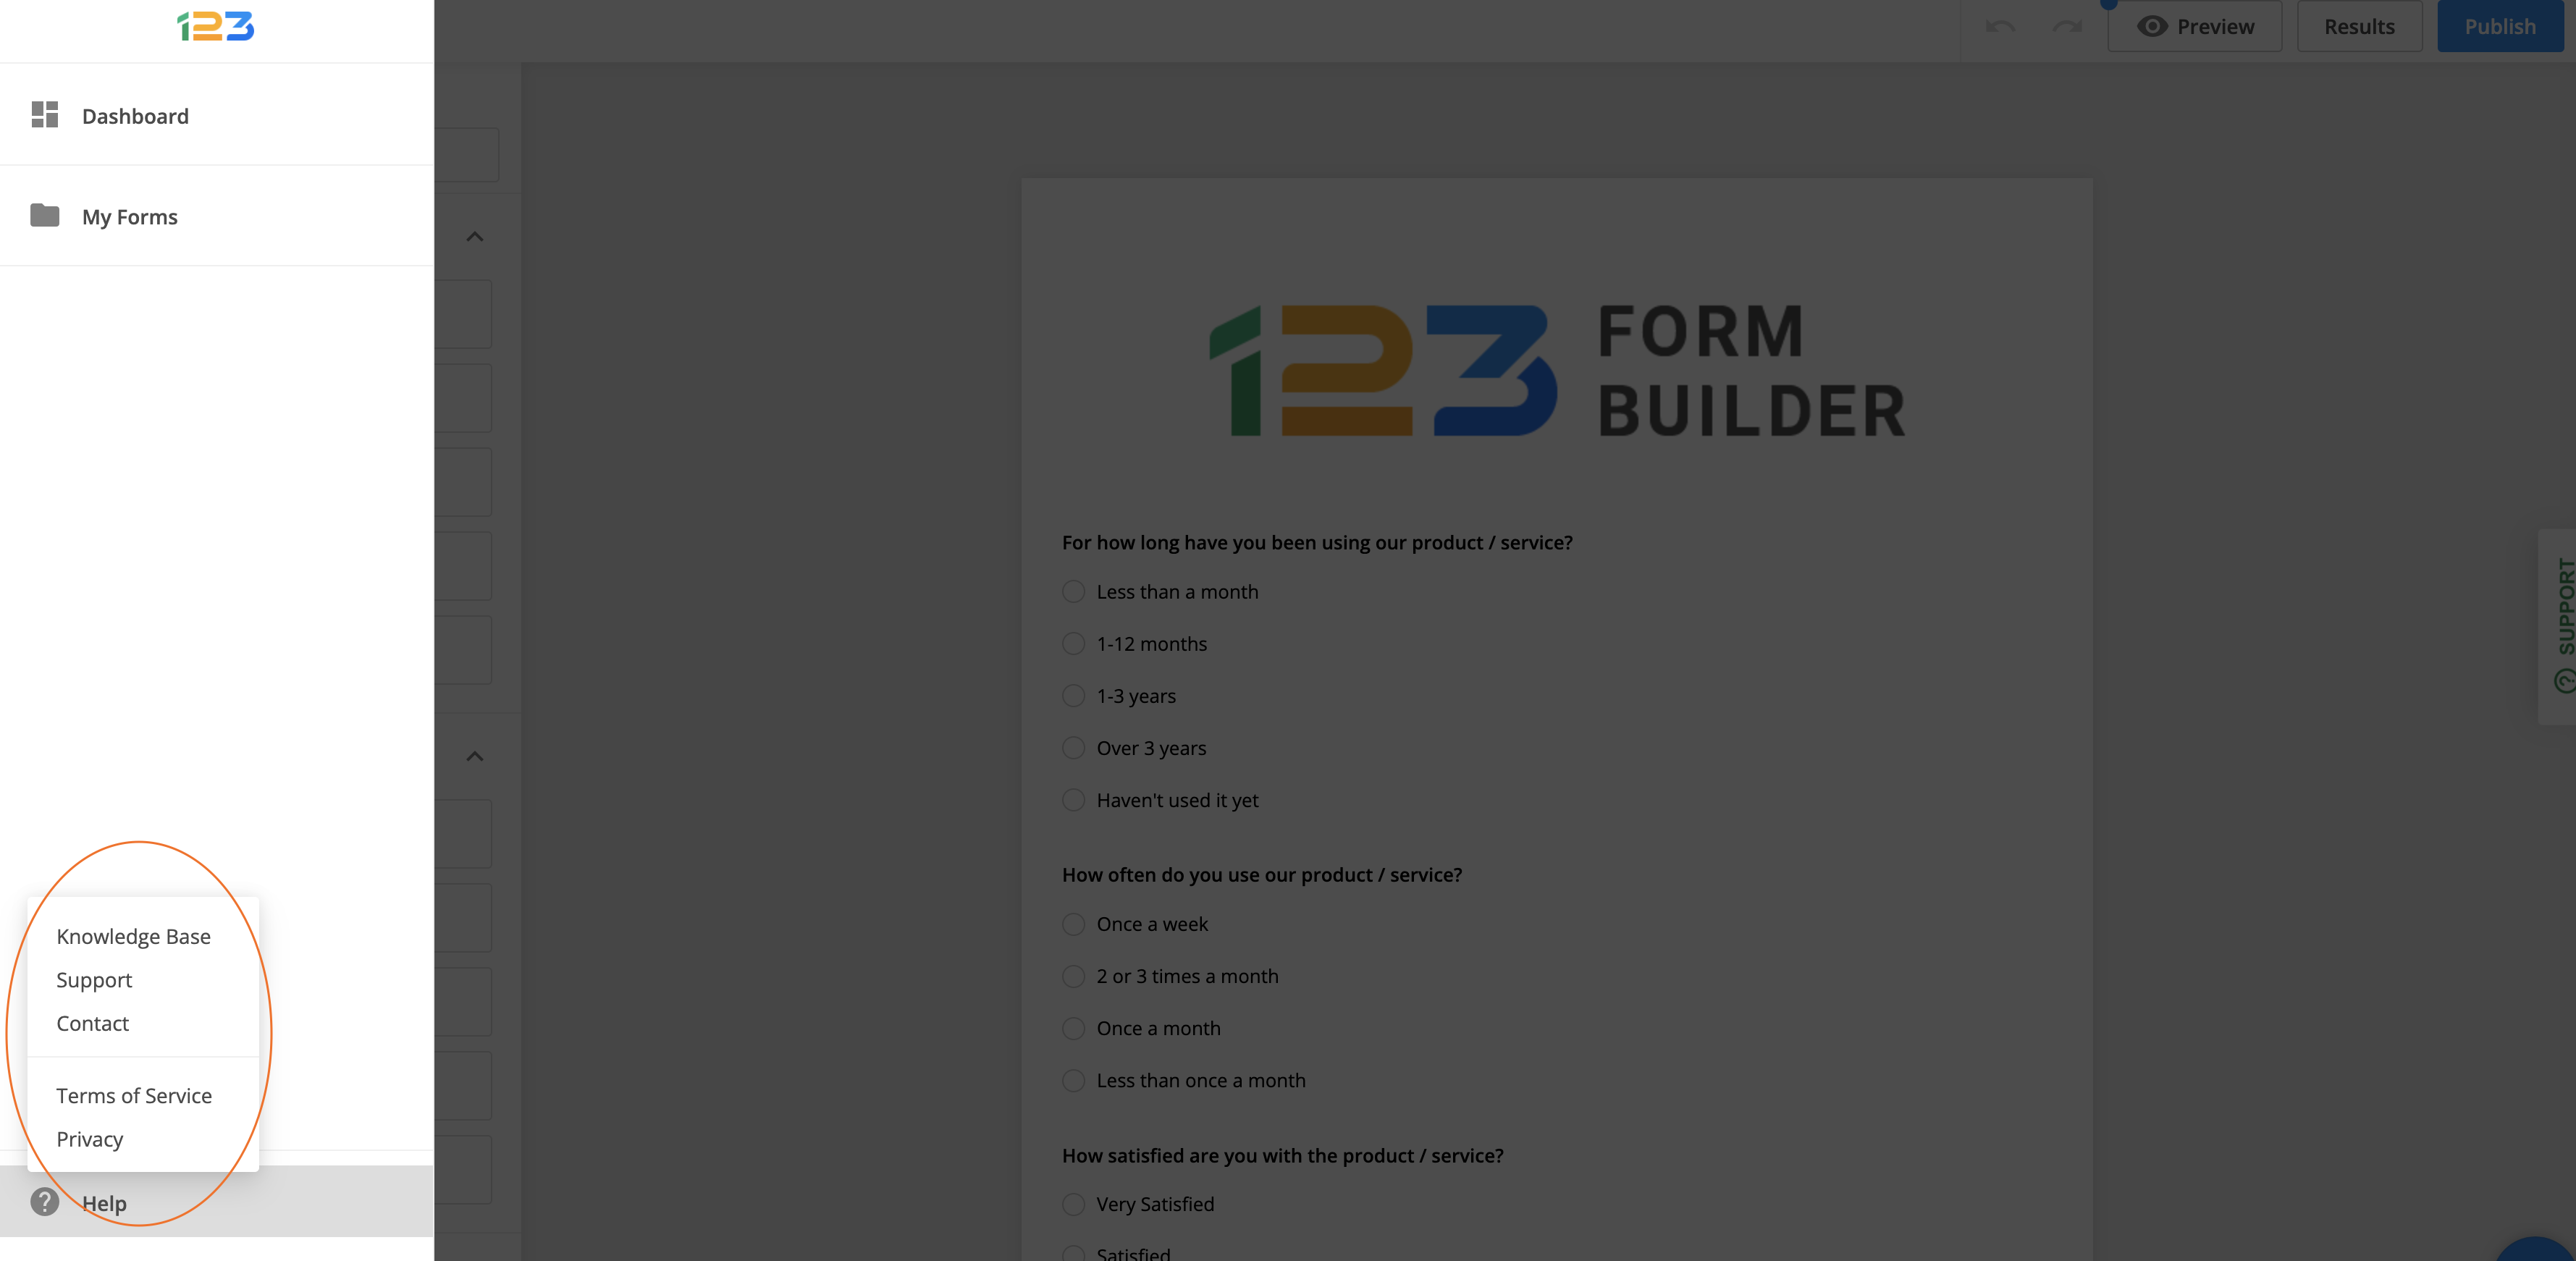 Web Forms Privacy Policy 123FormBuilder